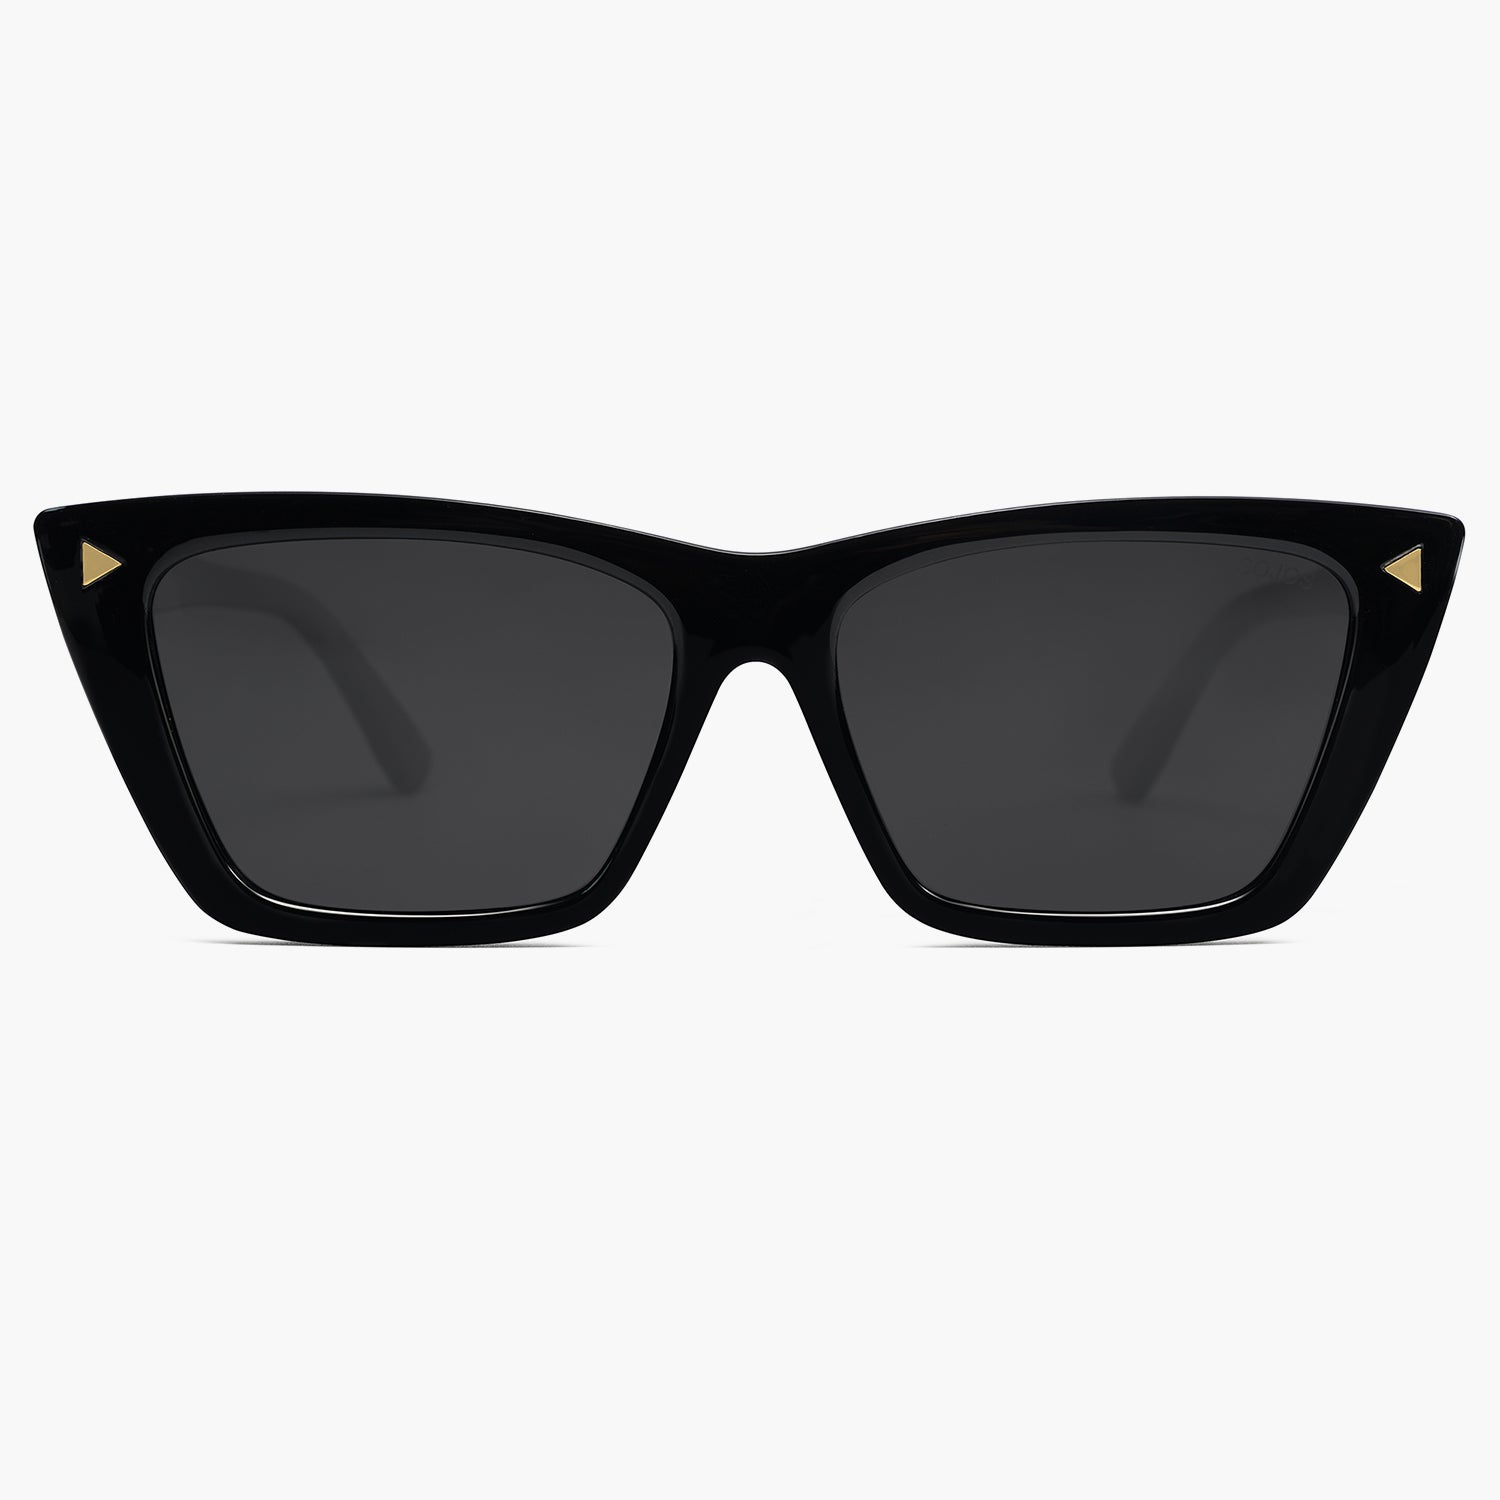 Check out the hottest modern eyewear 2023 – SOJOS